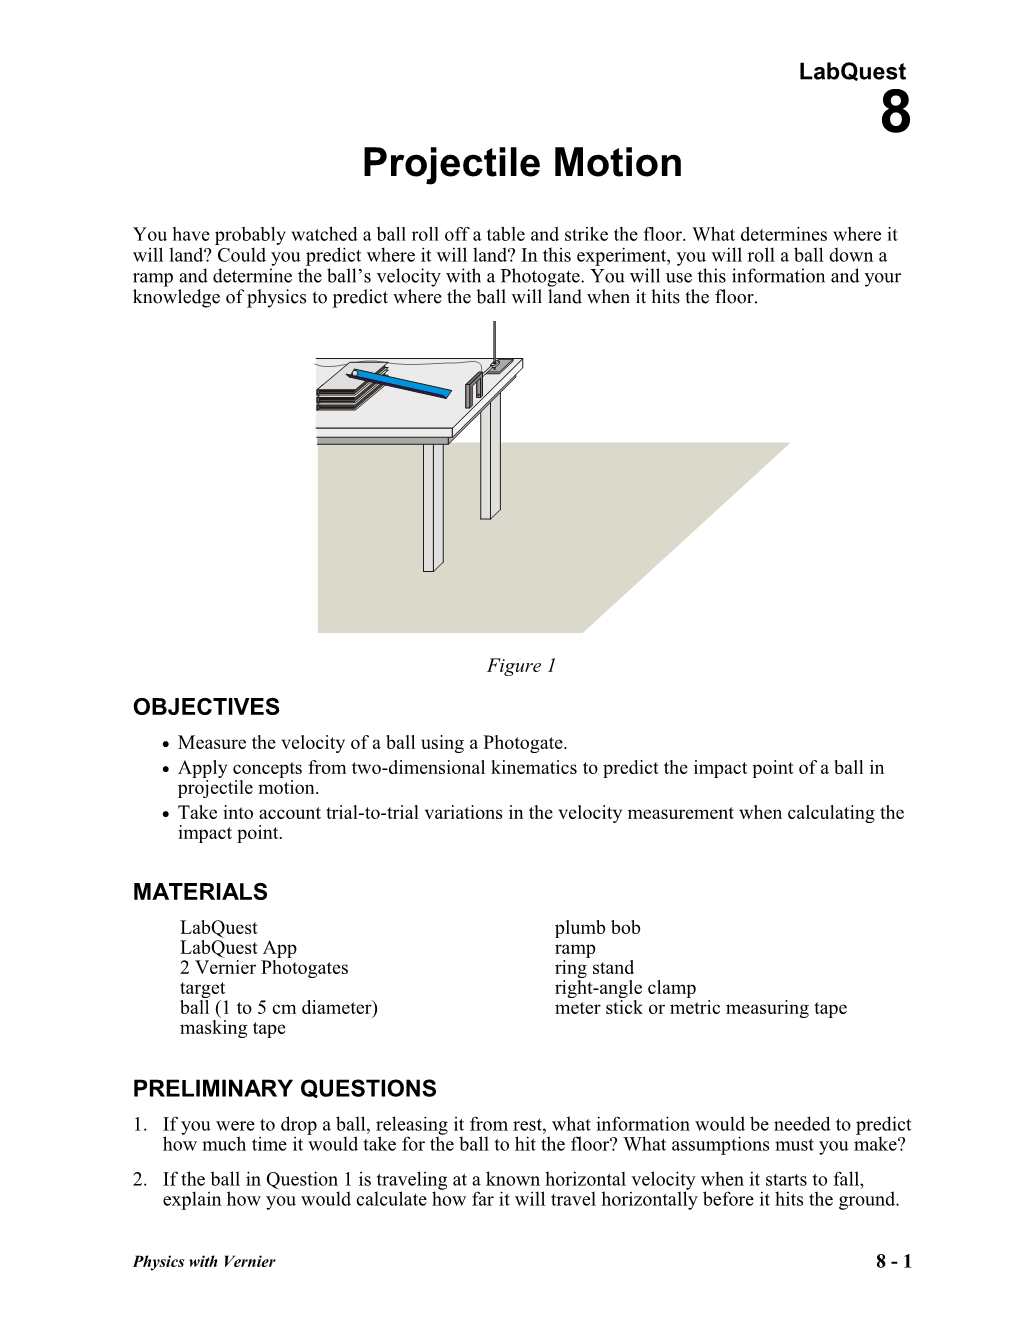 Projectile Motion s4